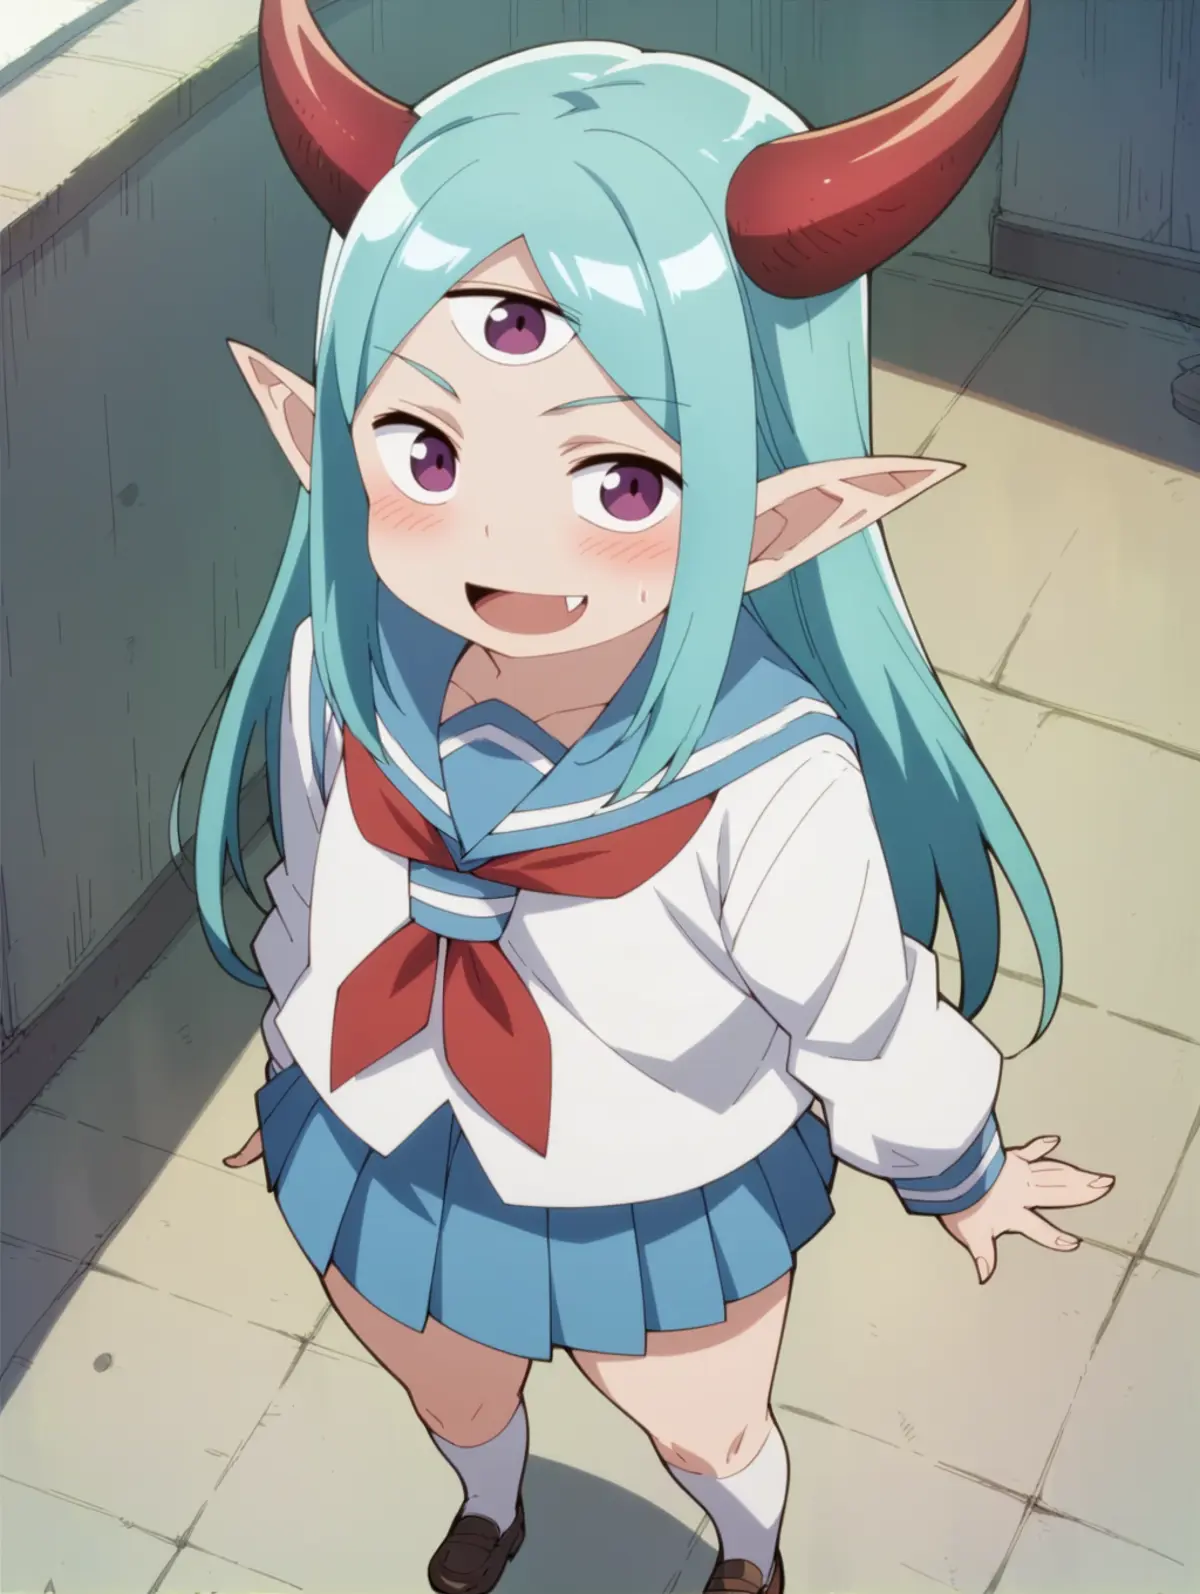 A boy with long blue hair and pointed ears dressed in a typical school uniform consisting of a white shirt with a blue collar, red necktie, and pleated skirt. He has light blue long hair and three eyes with the third on his forehead, and two large red horns on each side of his head